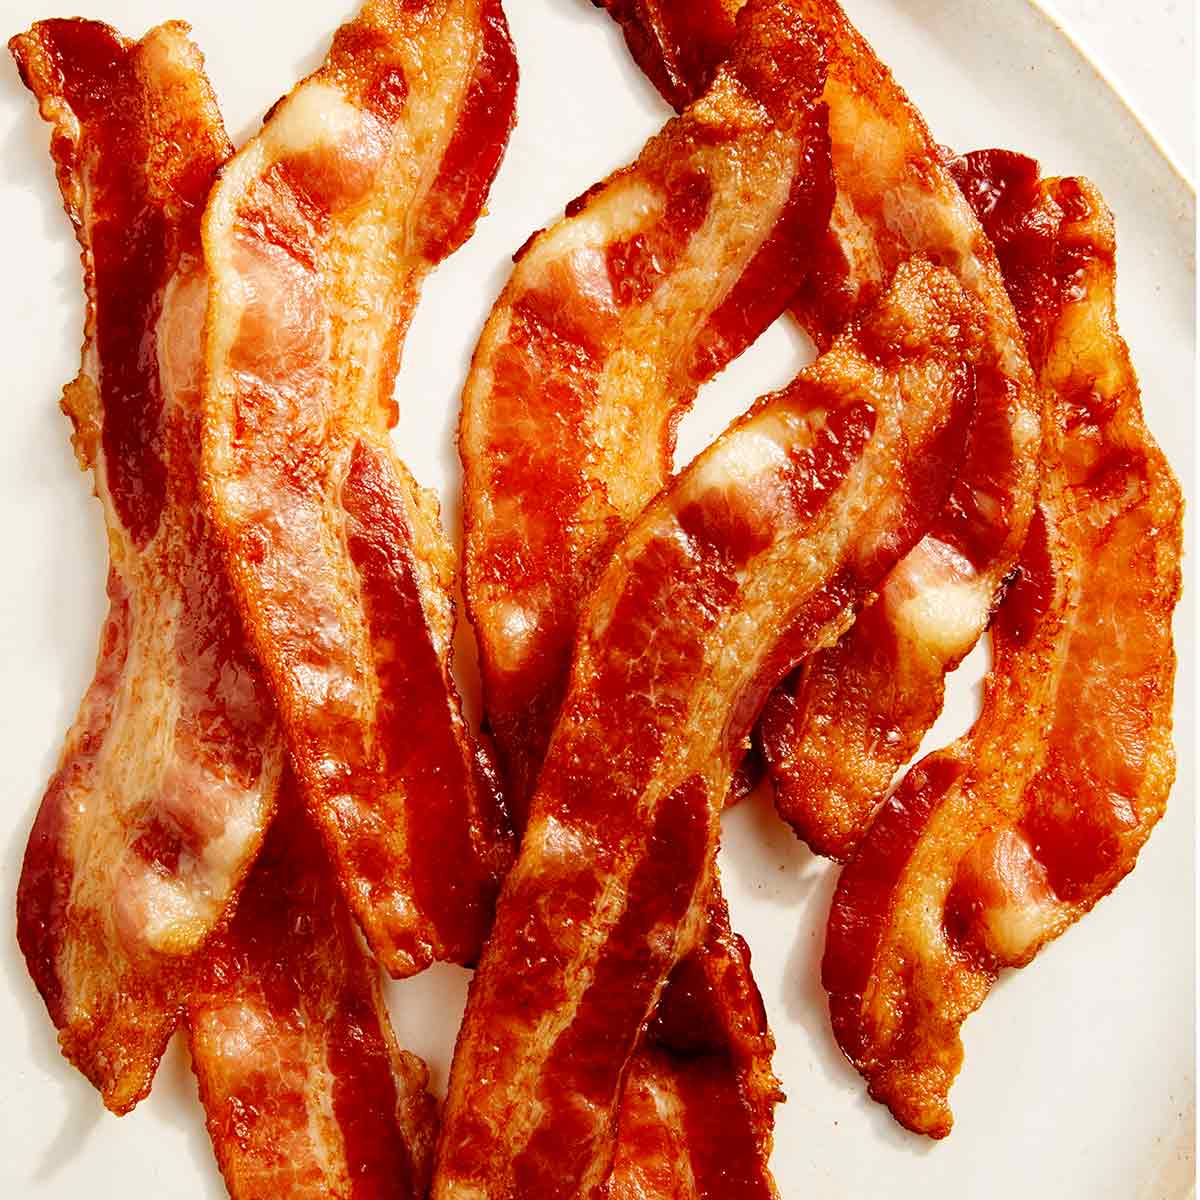 How To Prevent Bacon From Sticking To Your Baking Sheet